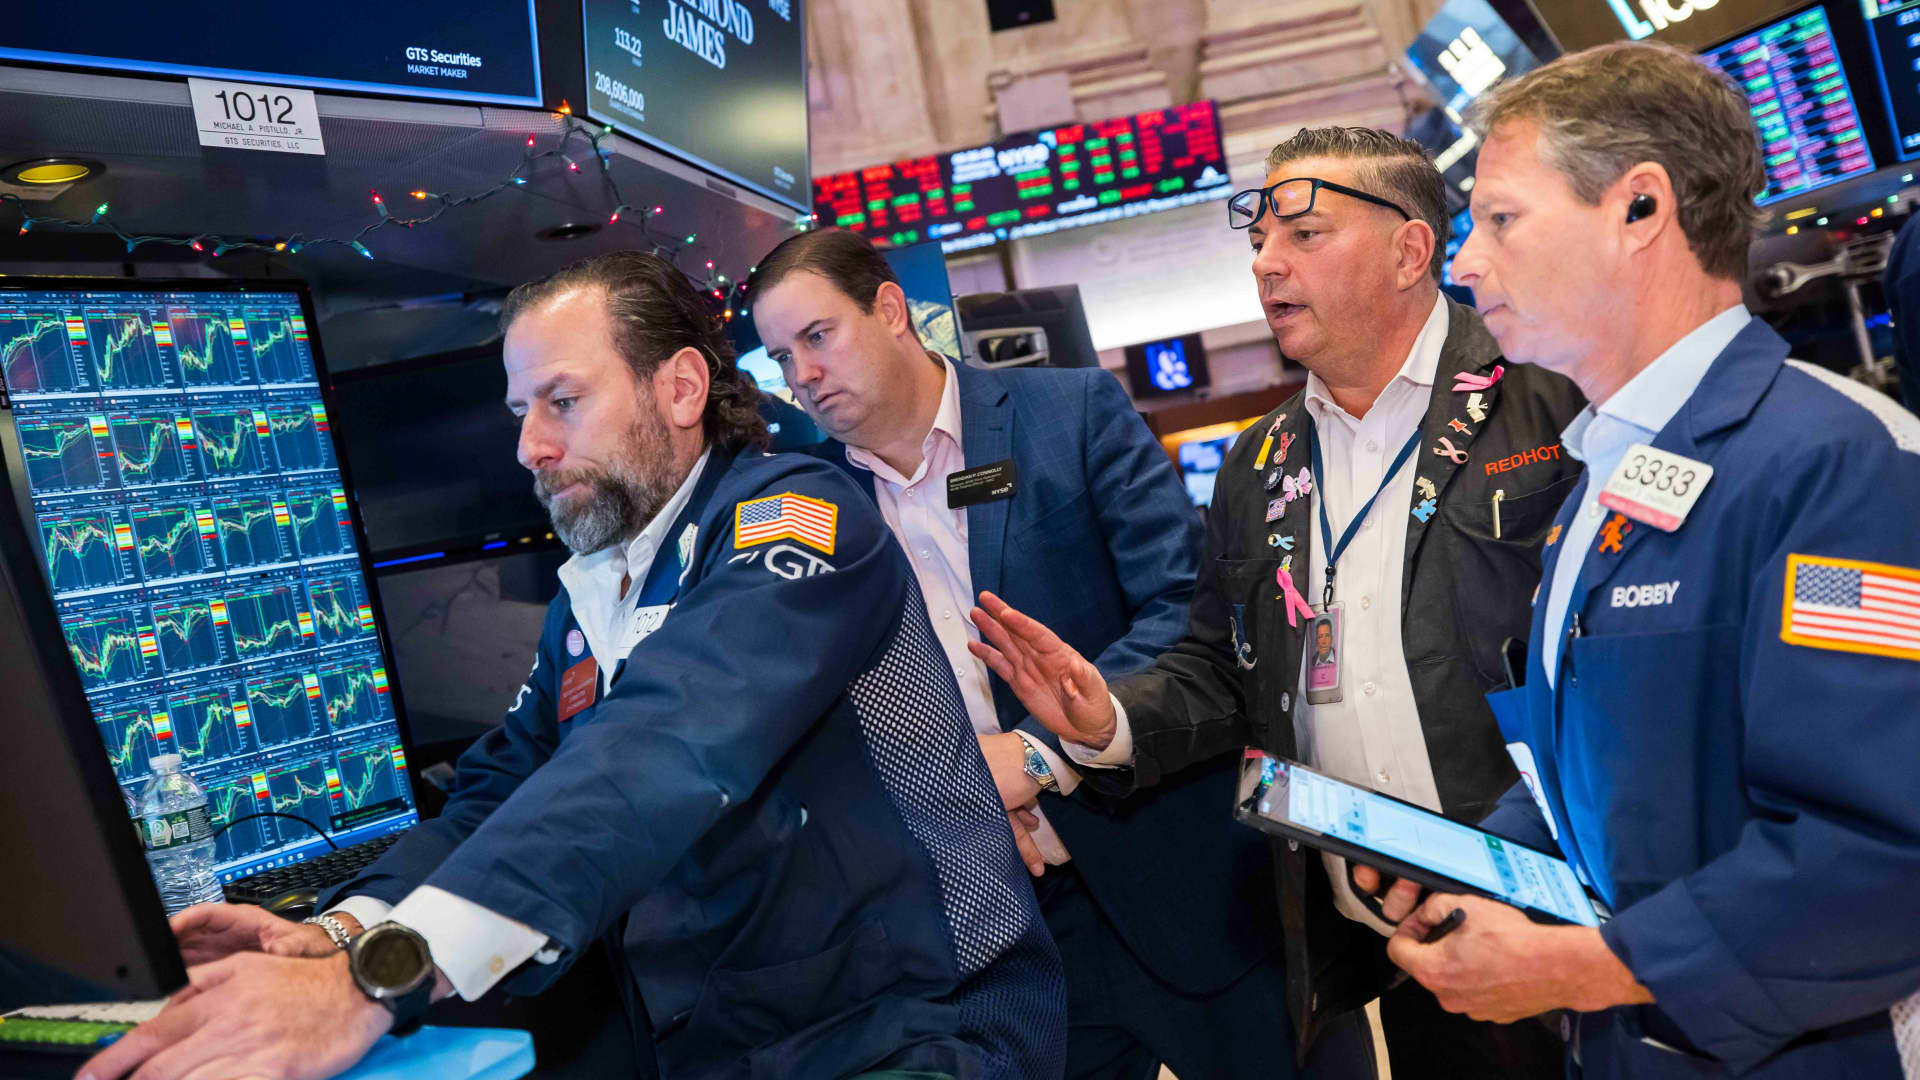 Dow closes 100 points higher Wednesday, S&P 500 hovers near a record high: Live updates